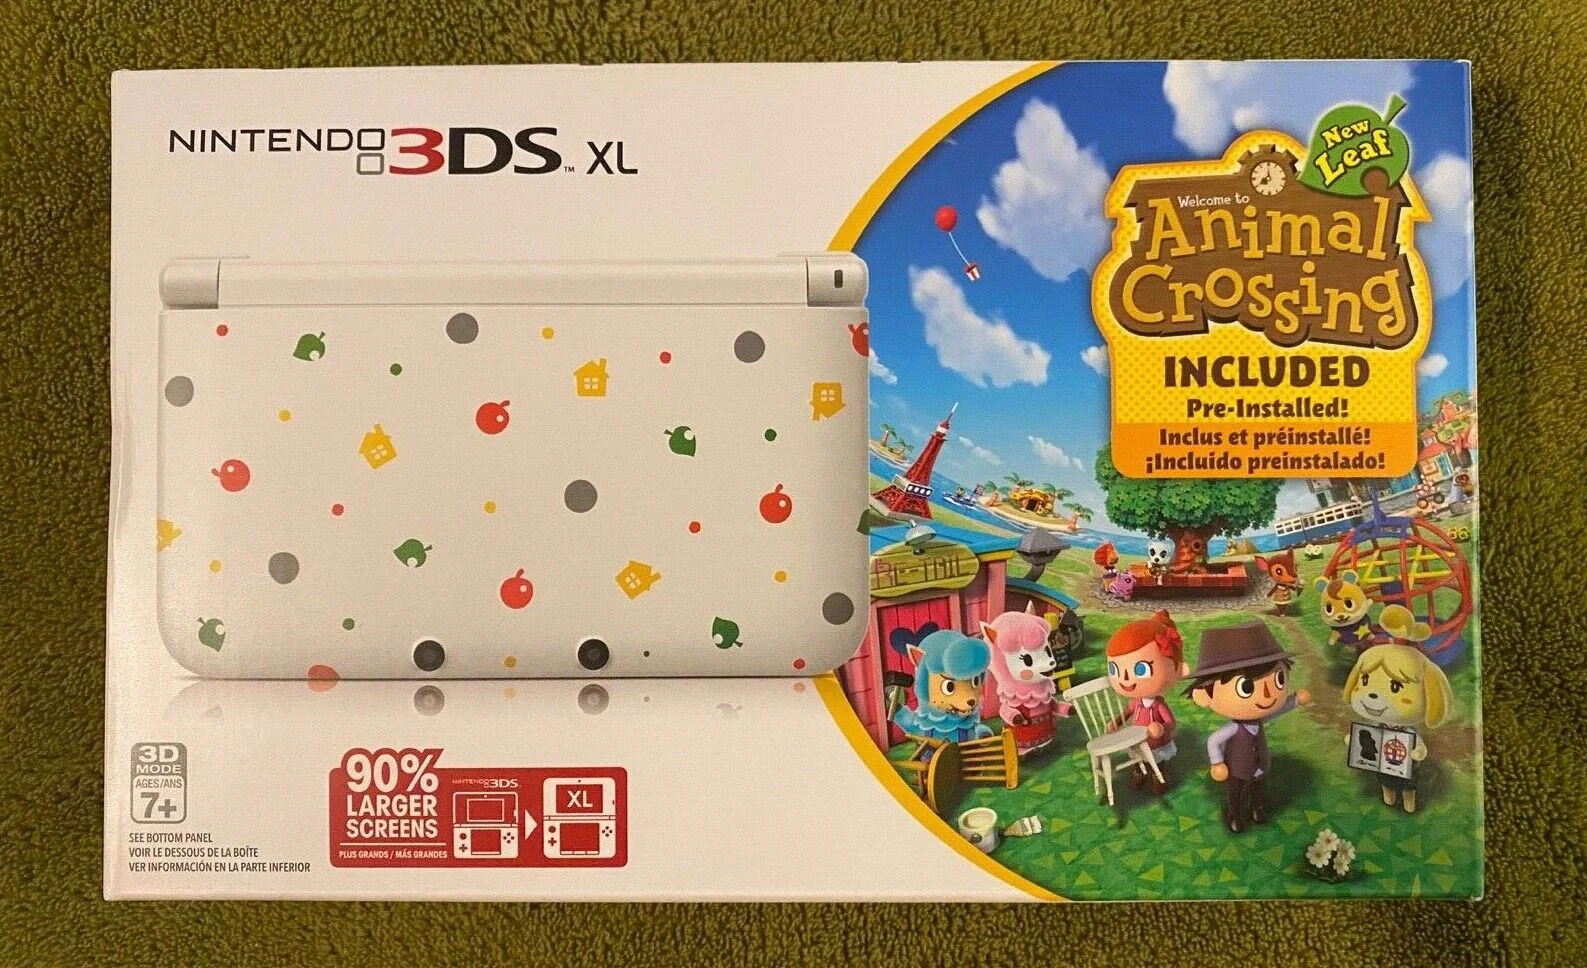  Nintendo 3DS XL Animal Crossing Console [NA]